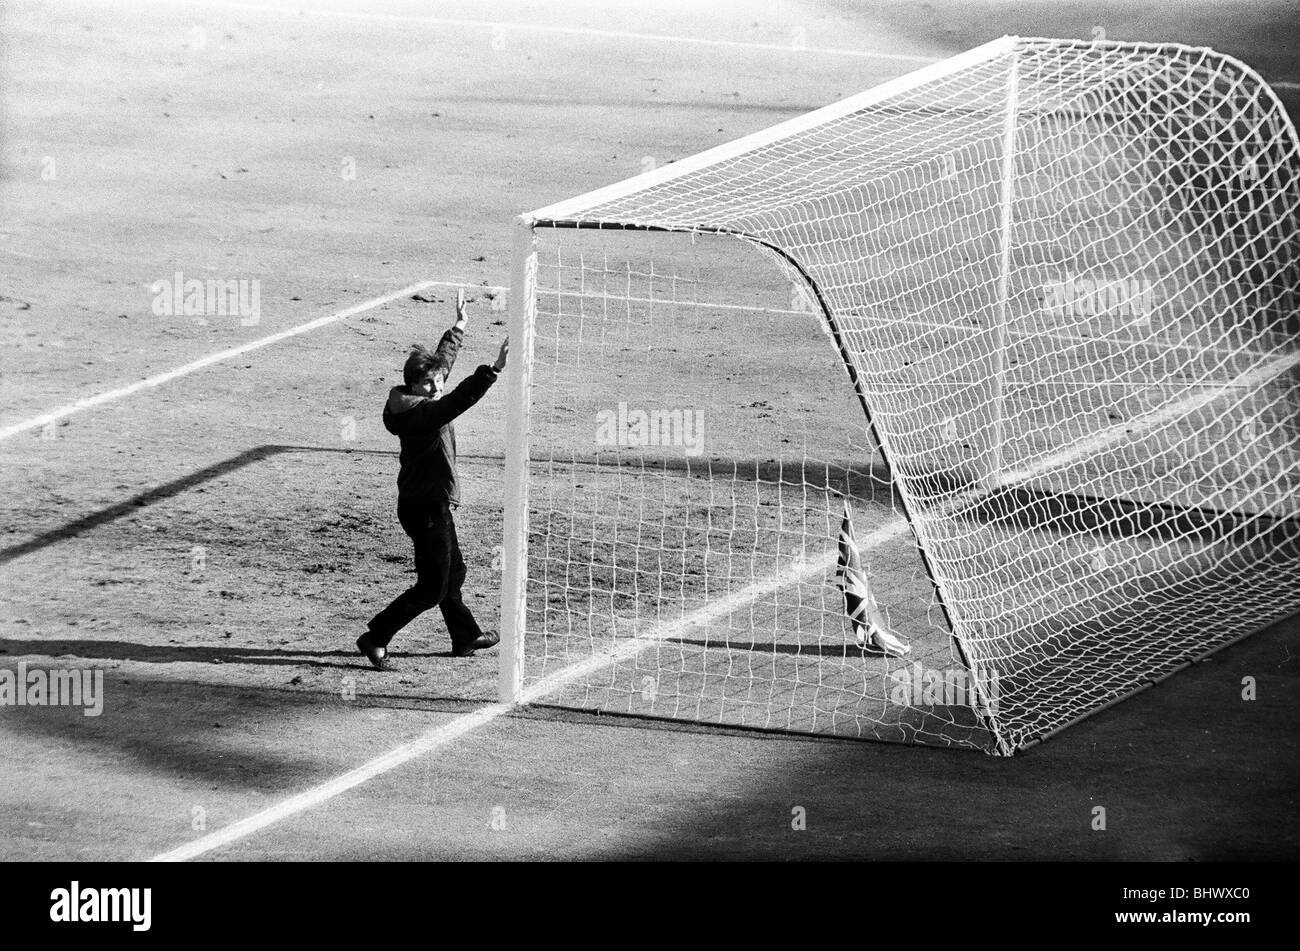 England v West Germany World Cup Final 1999, 30th July 1966. Amid the happy frenzy, a lone supporter paid homage at the goal Stock Photo